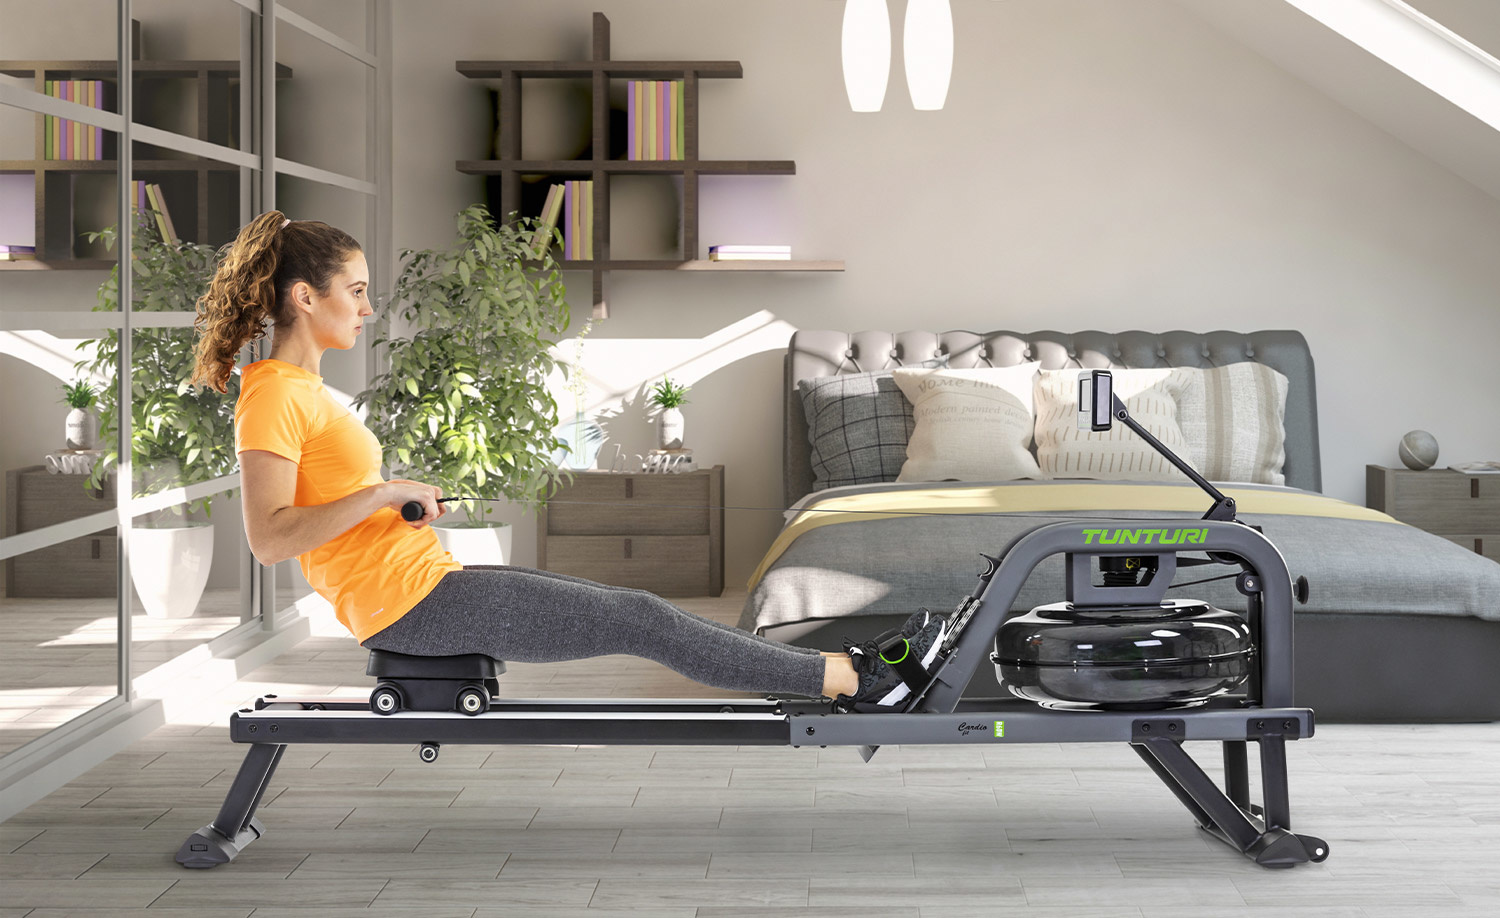 What should you pay attention to when buying a rowing machine?